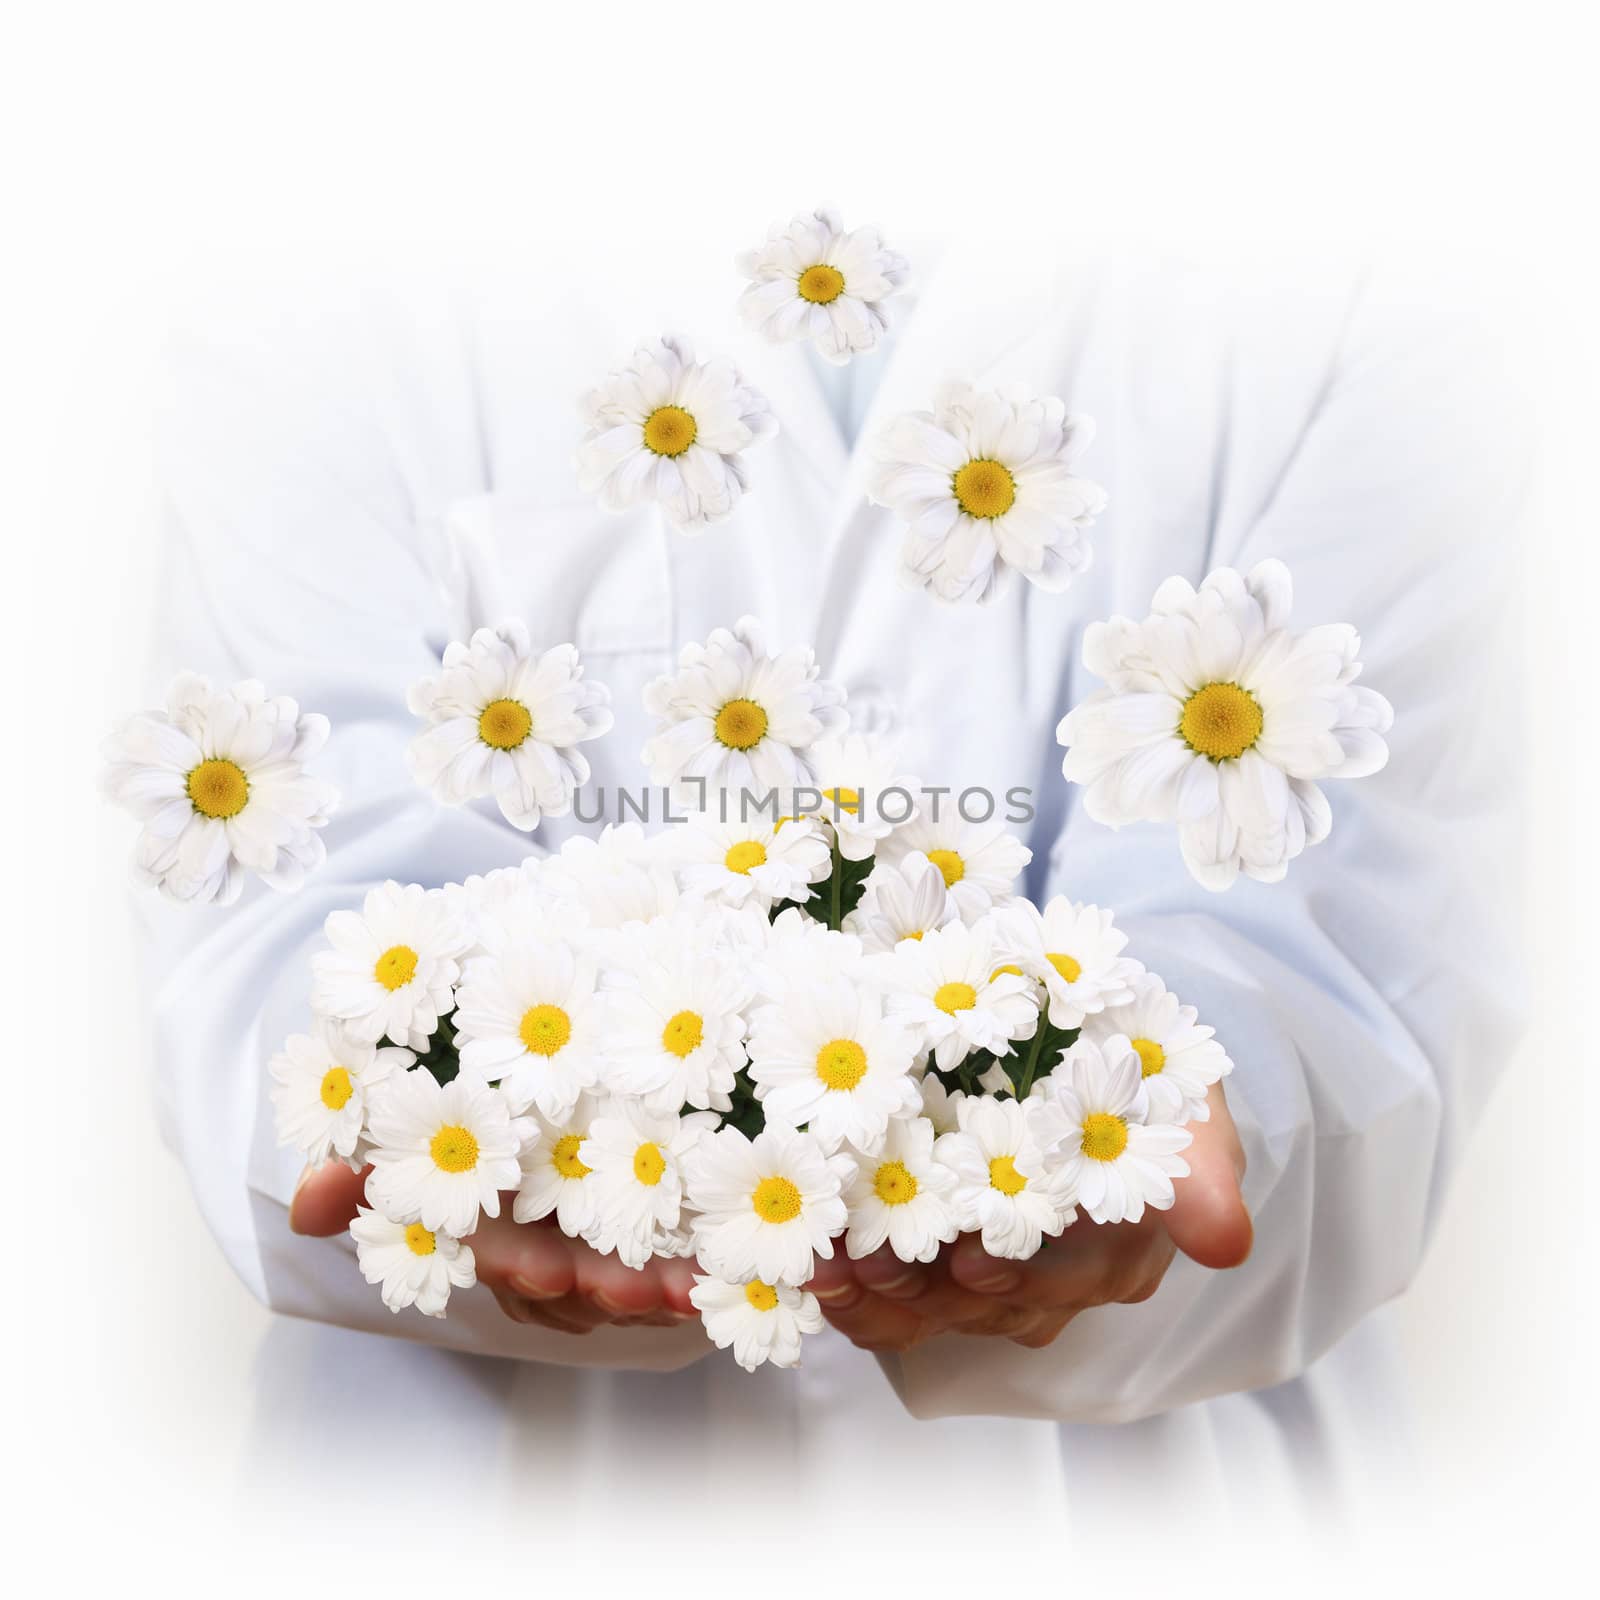 A camomile flower and human hands illustration